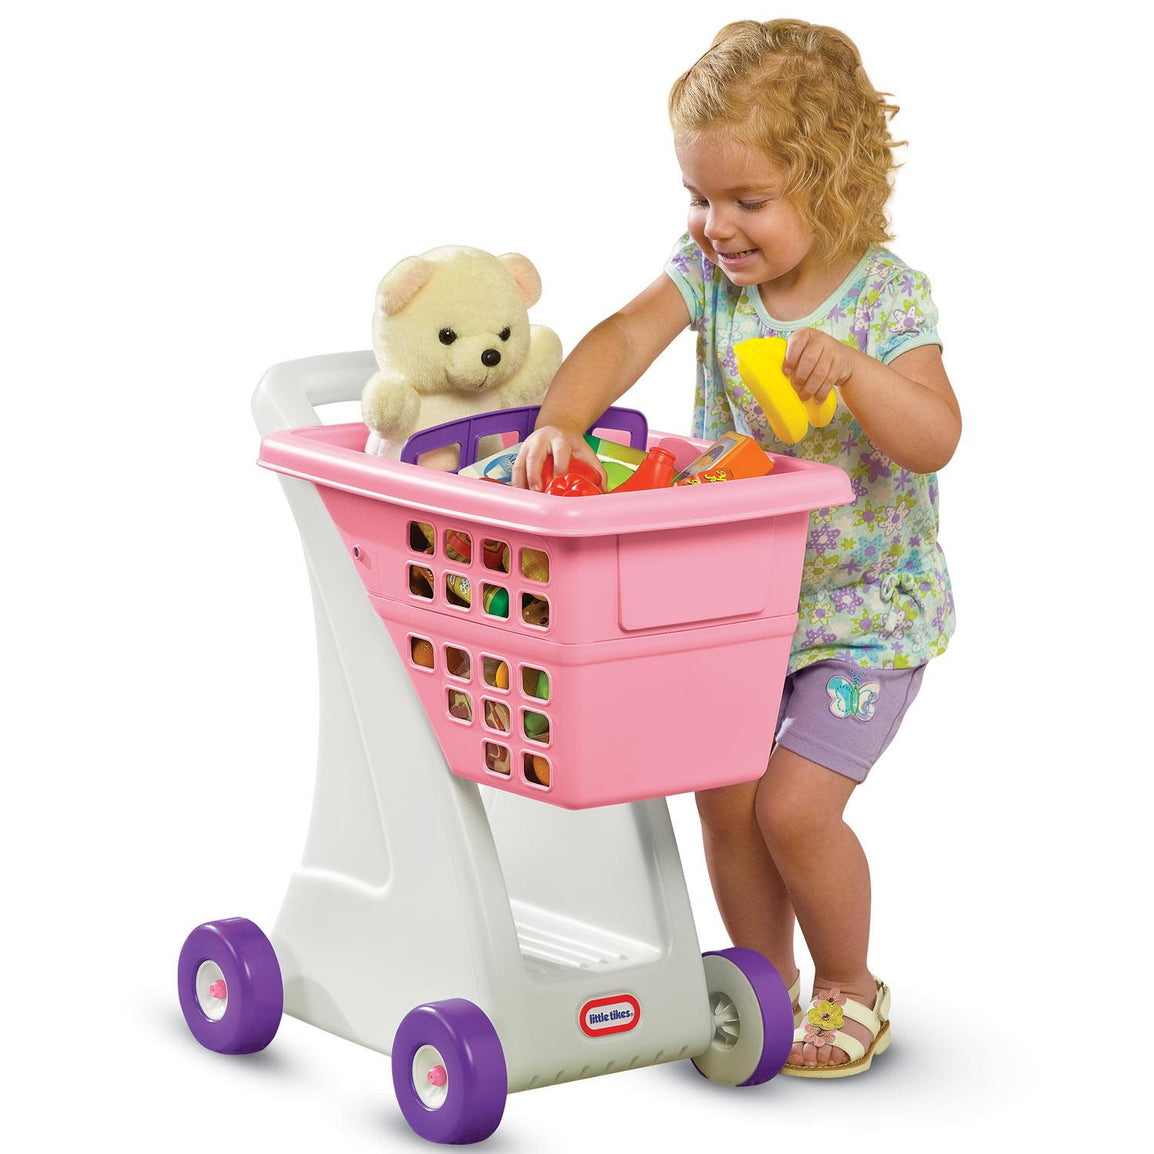 Kids can take their favorite toy along for the ride in the shopping cart se